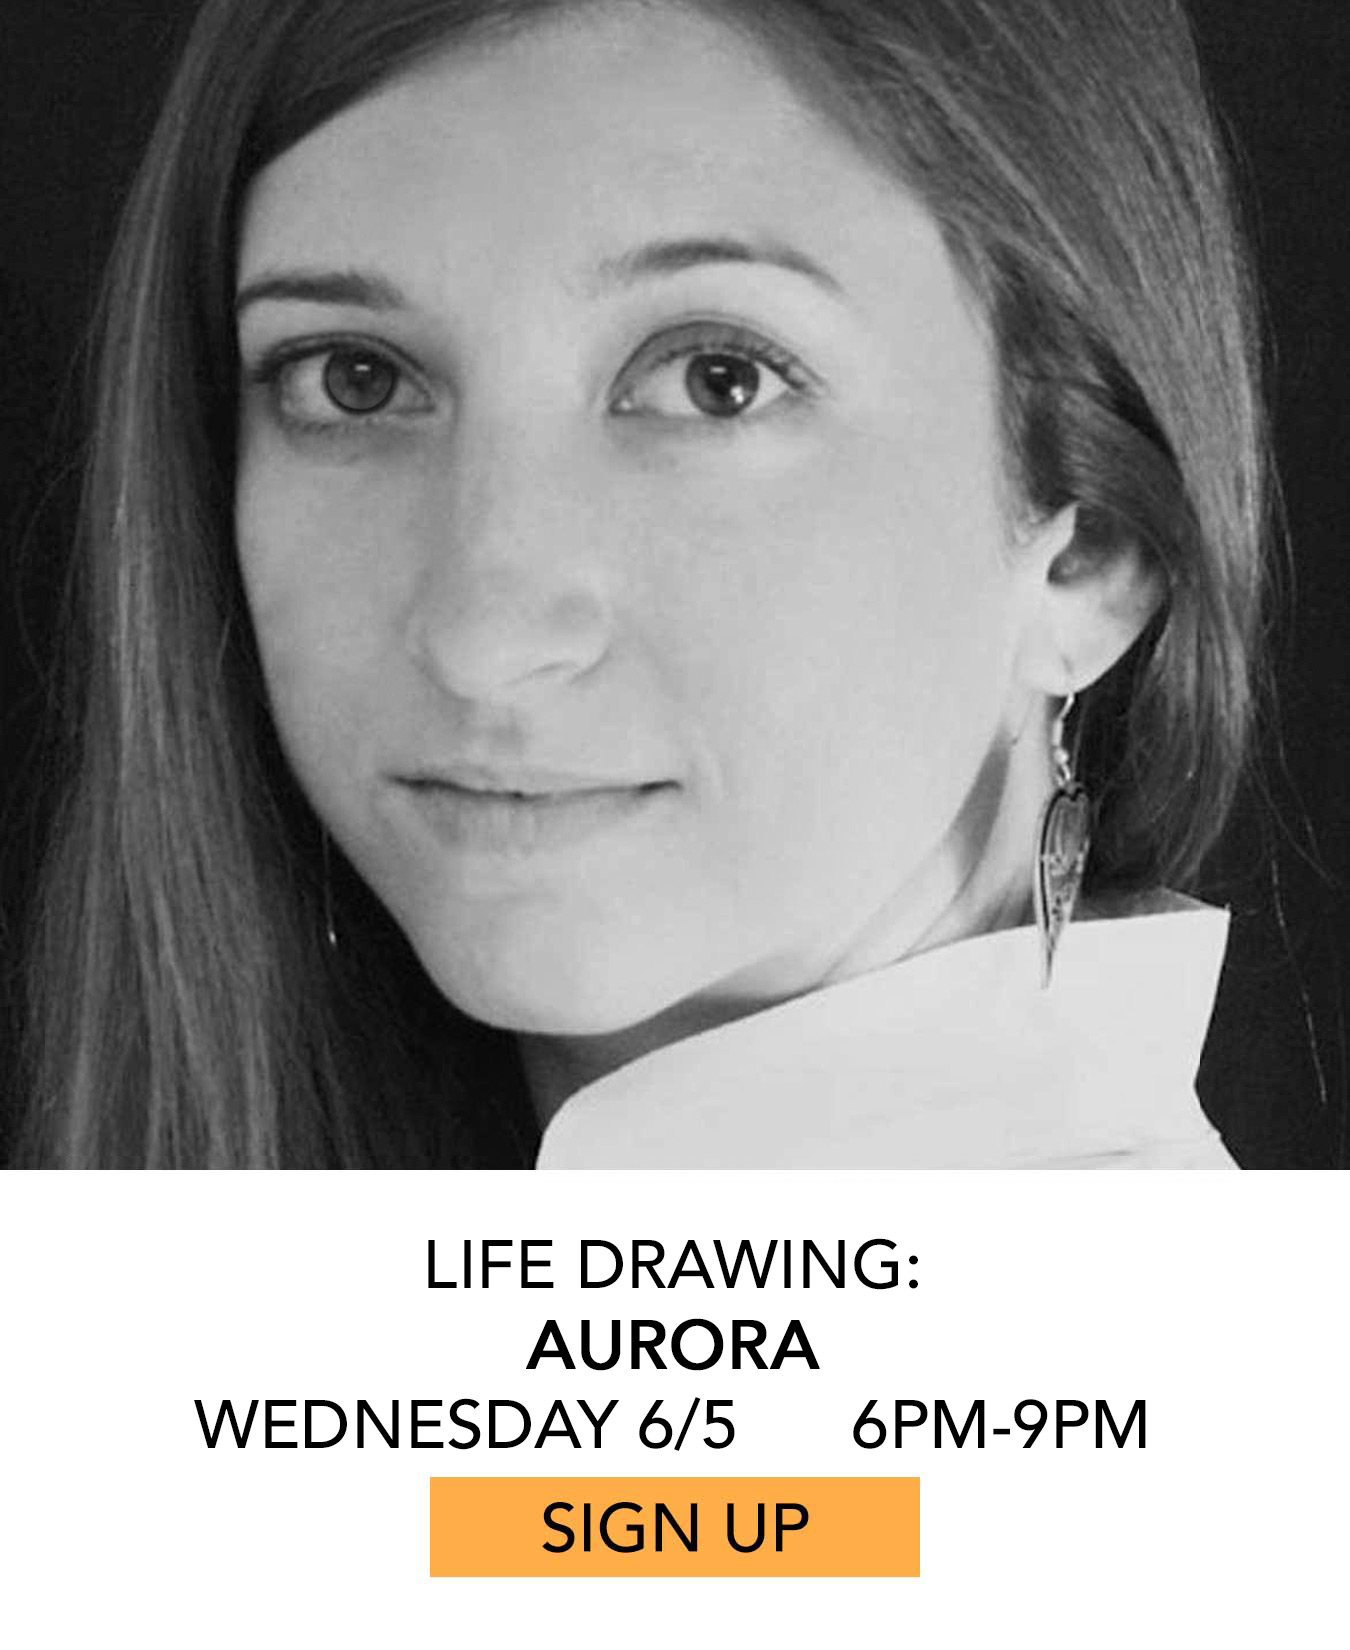 Life Drawing: Aurora. Wednesday 6/5 from 6pm to 9pm. Click to Sign Up.